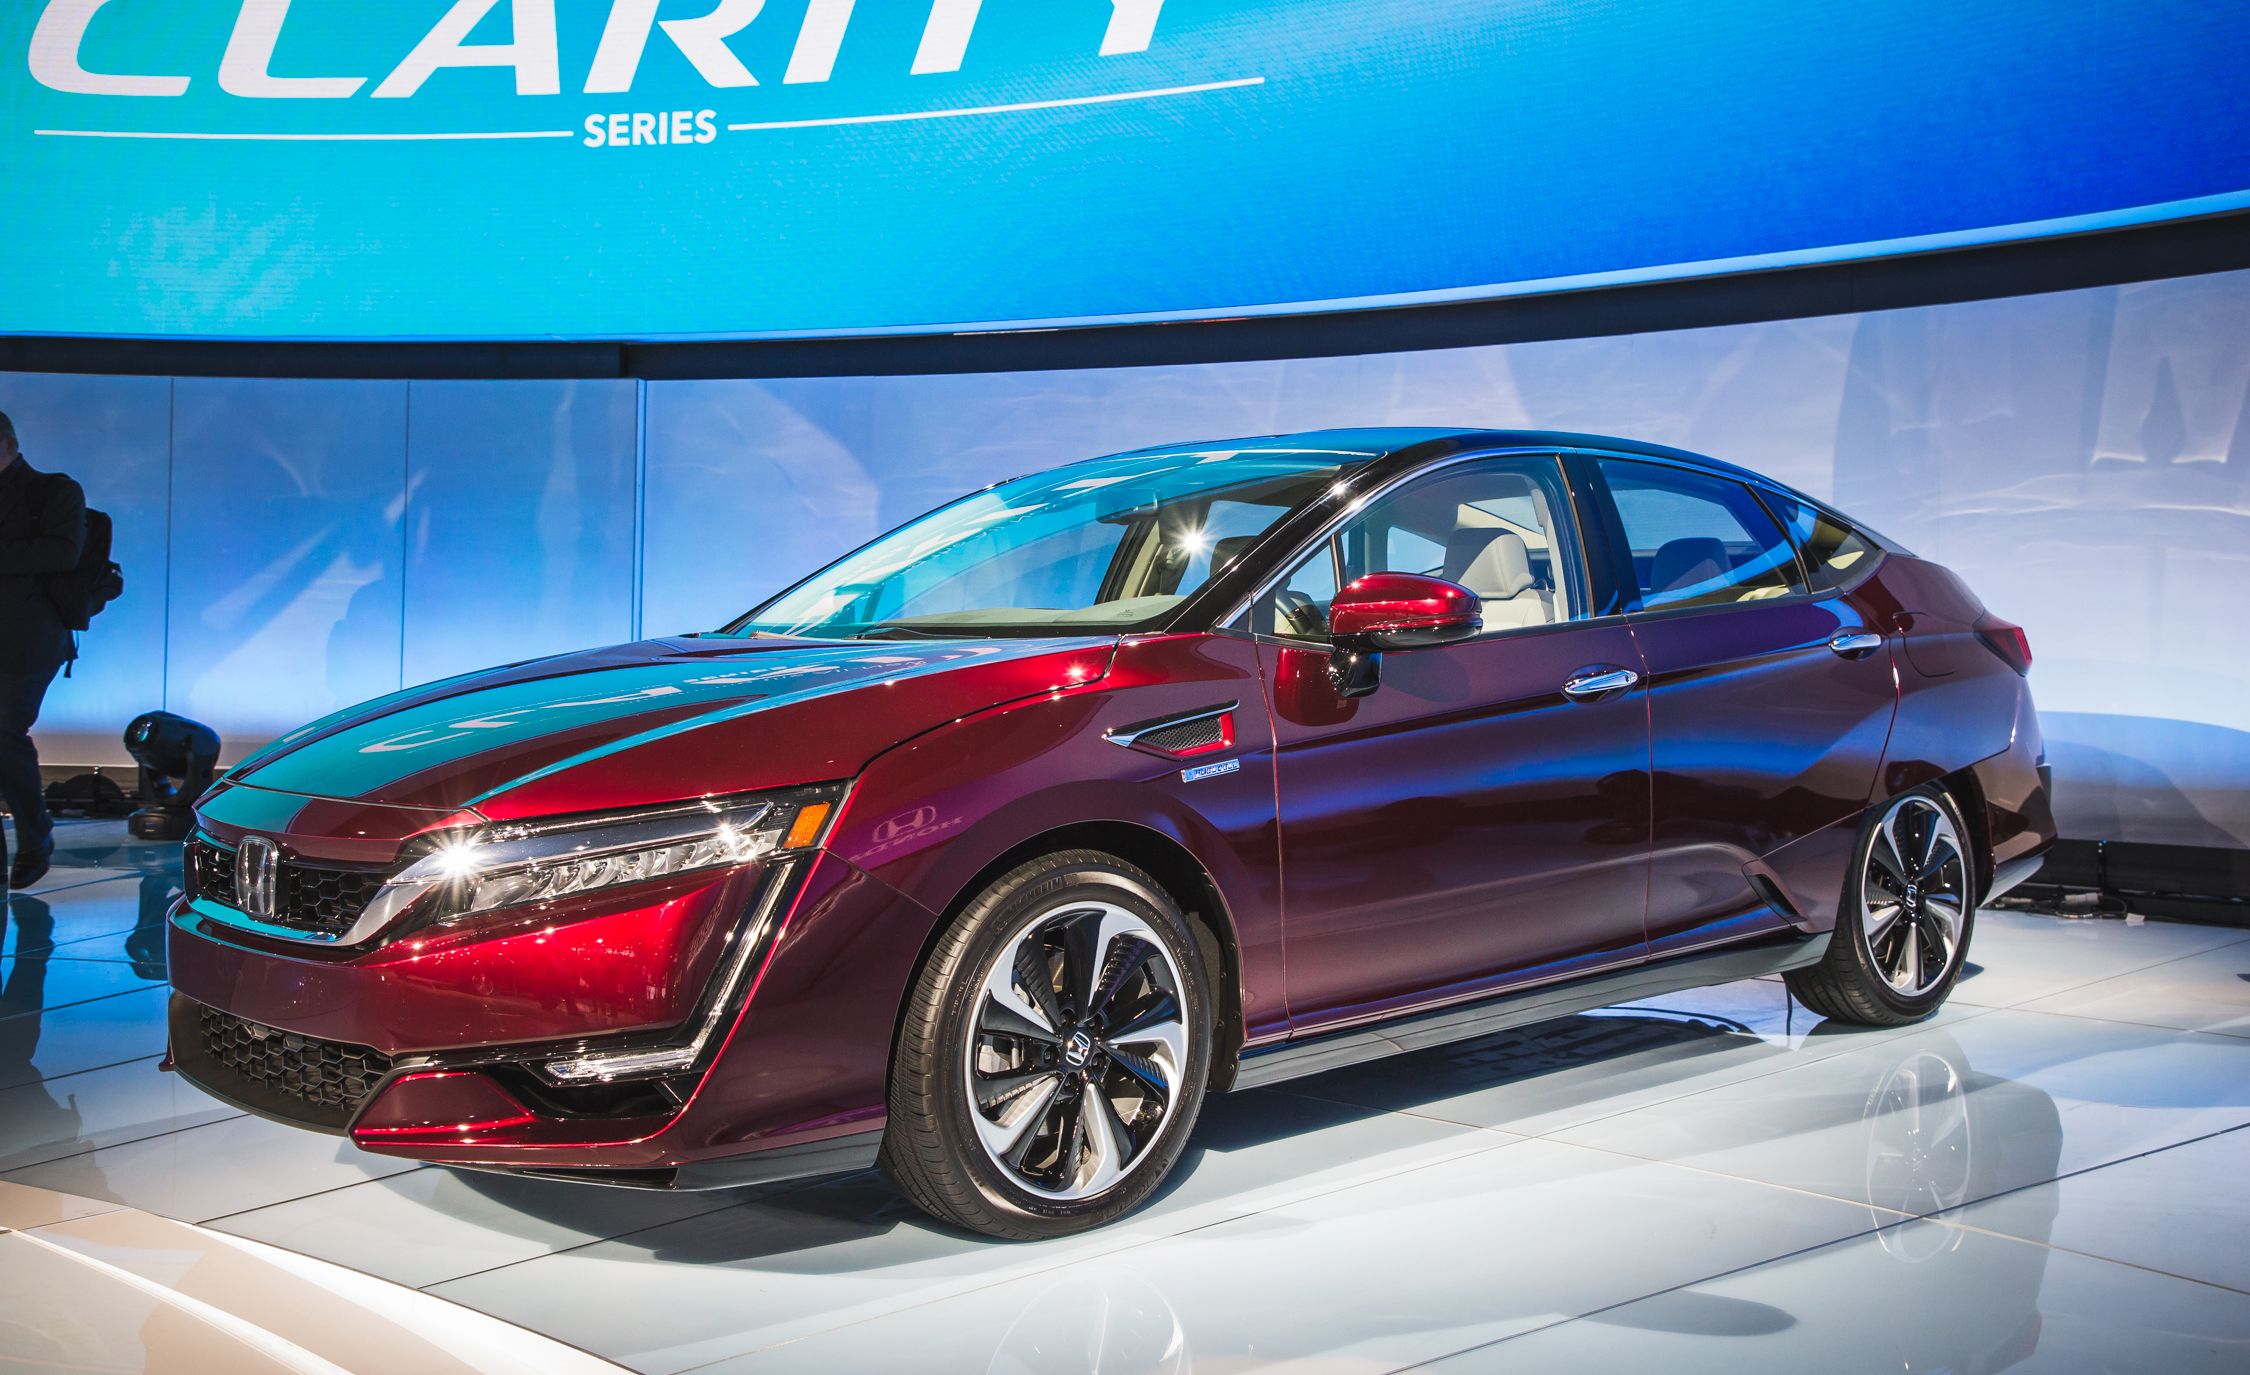 2018 Honda Clarity Electric and Plug-in Hybrid Photos and Info| News | Car  and Driver